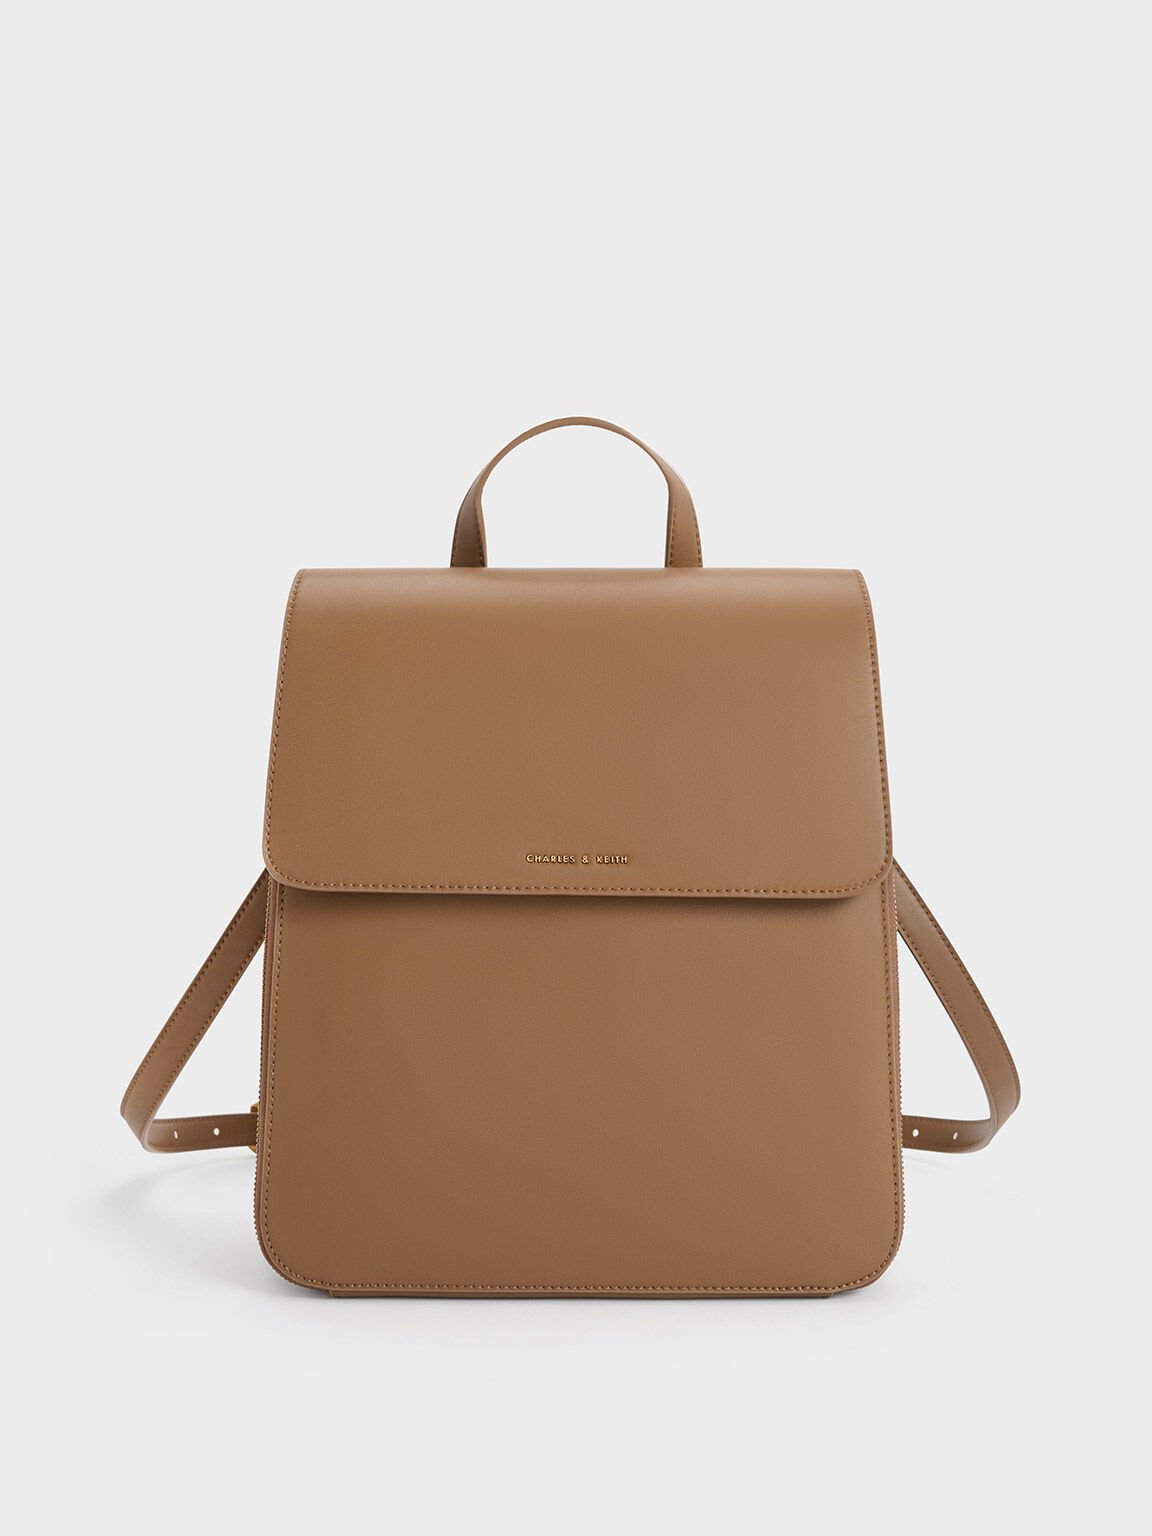 Charles & Keith Two-Tone Structured Top Handle Bag